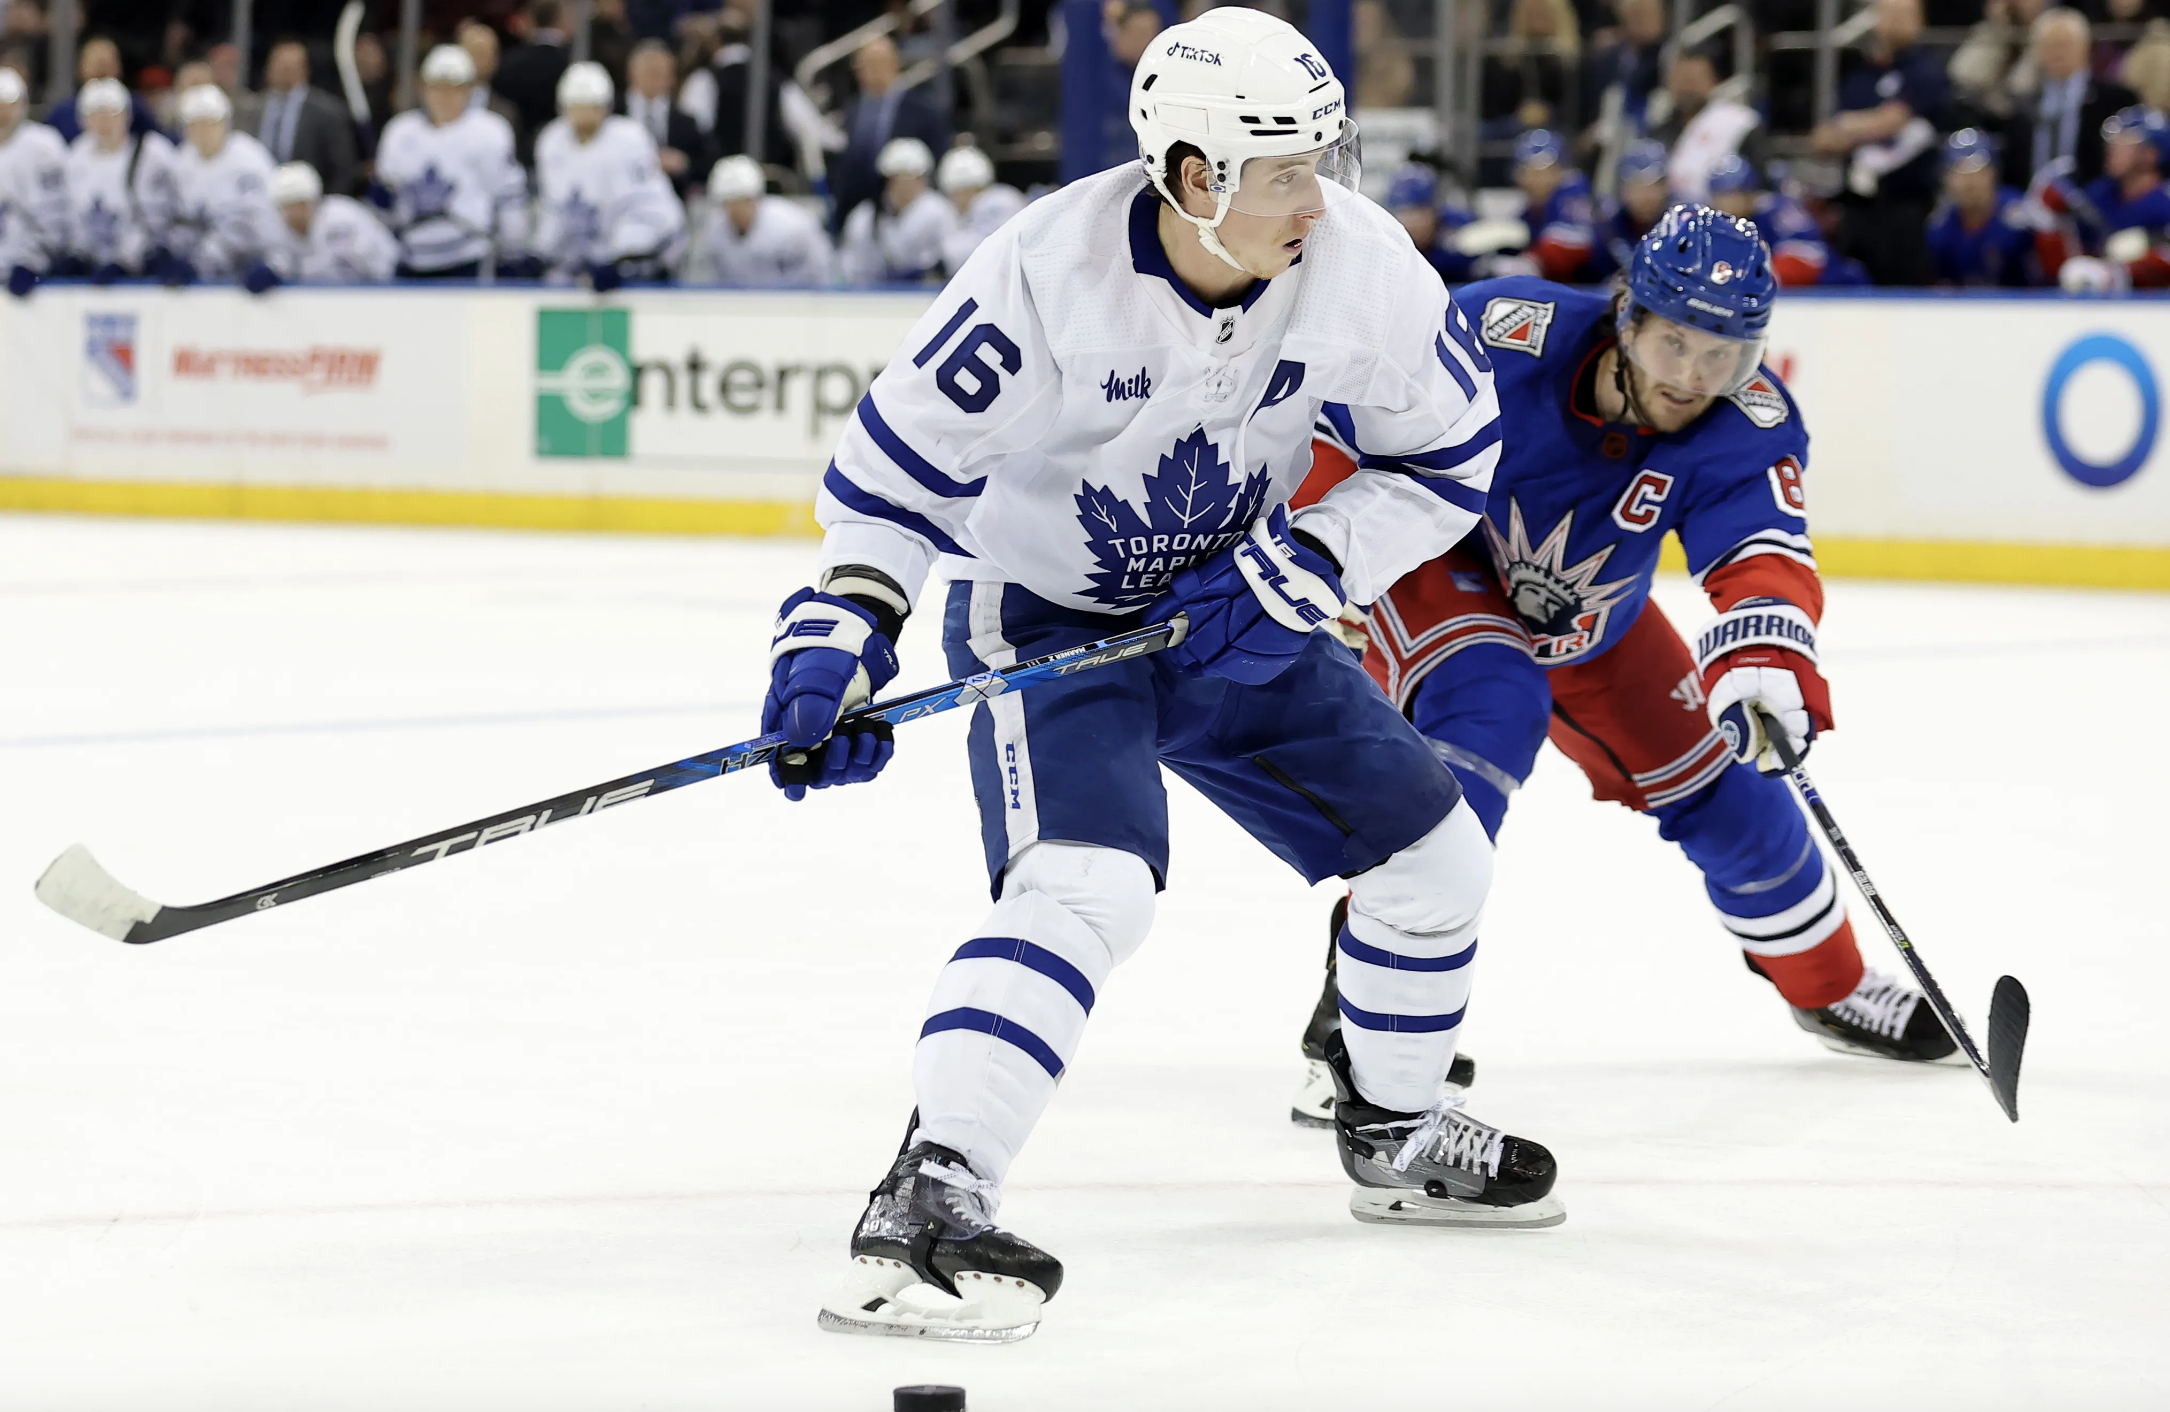 Mitch Marner responds to idea of breaking up Maple Leafs core